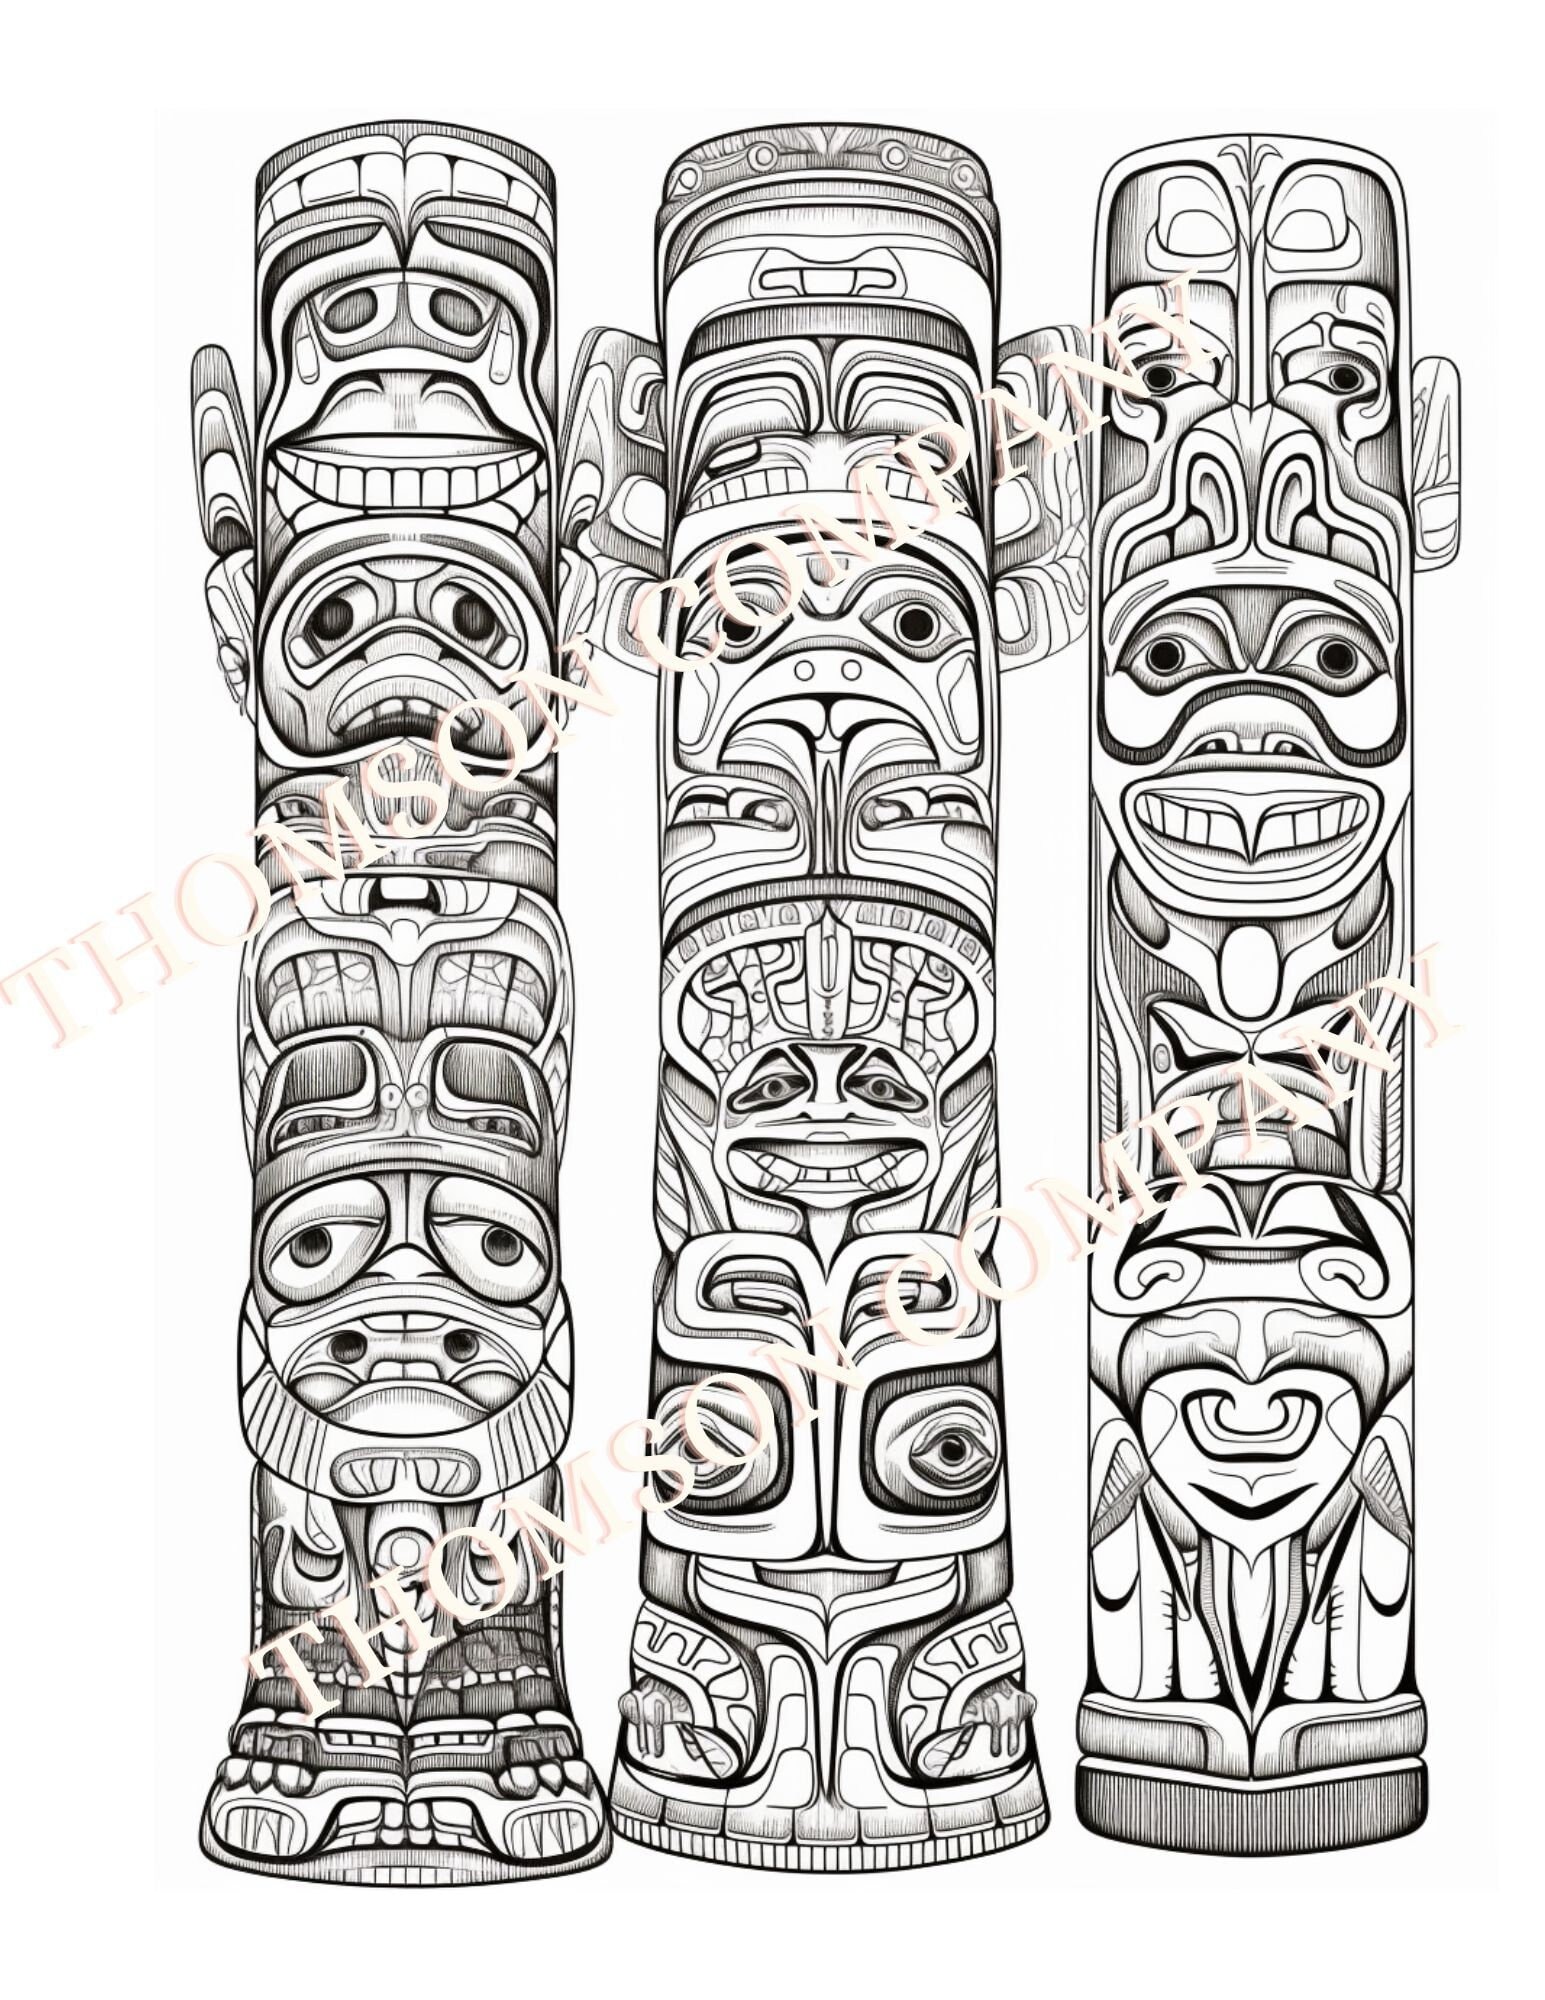 Intricate native american totem pole coloring pages to de